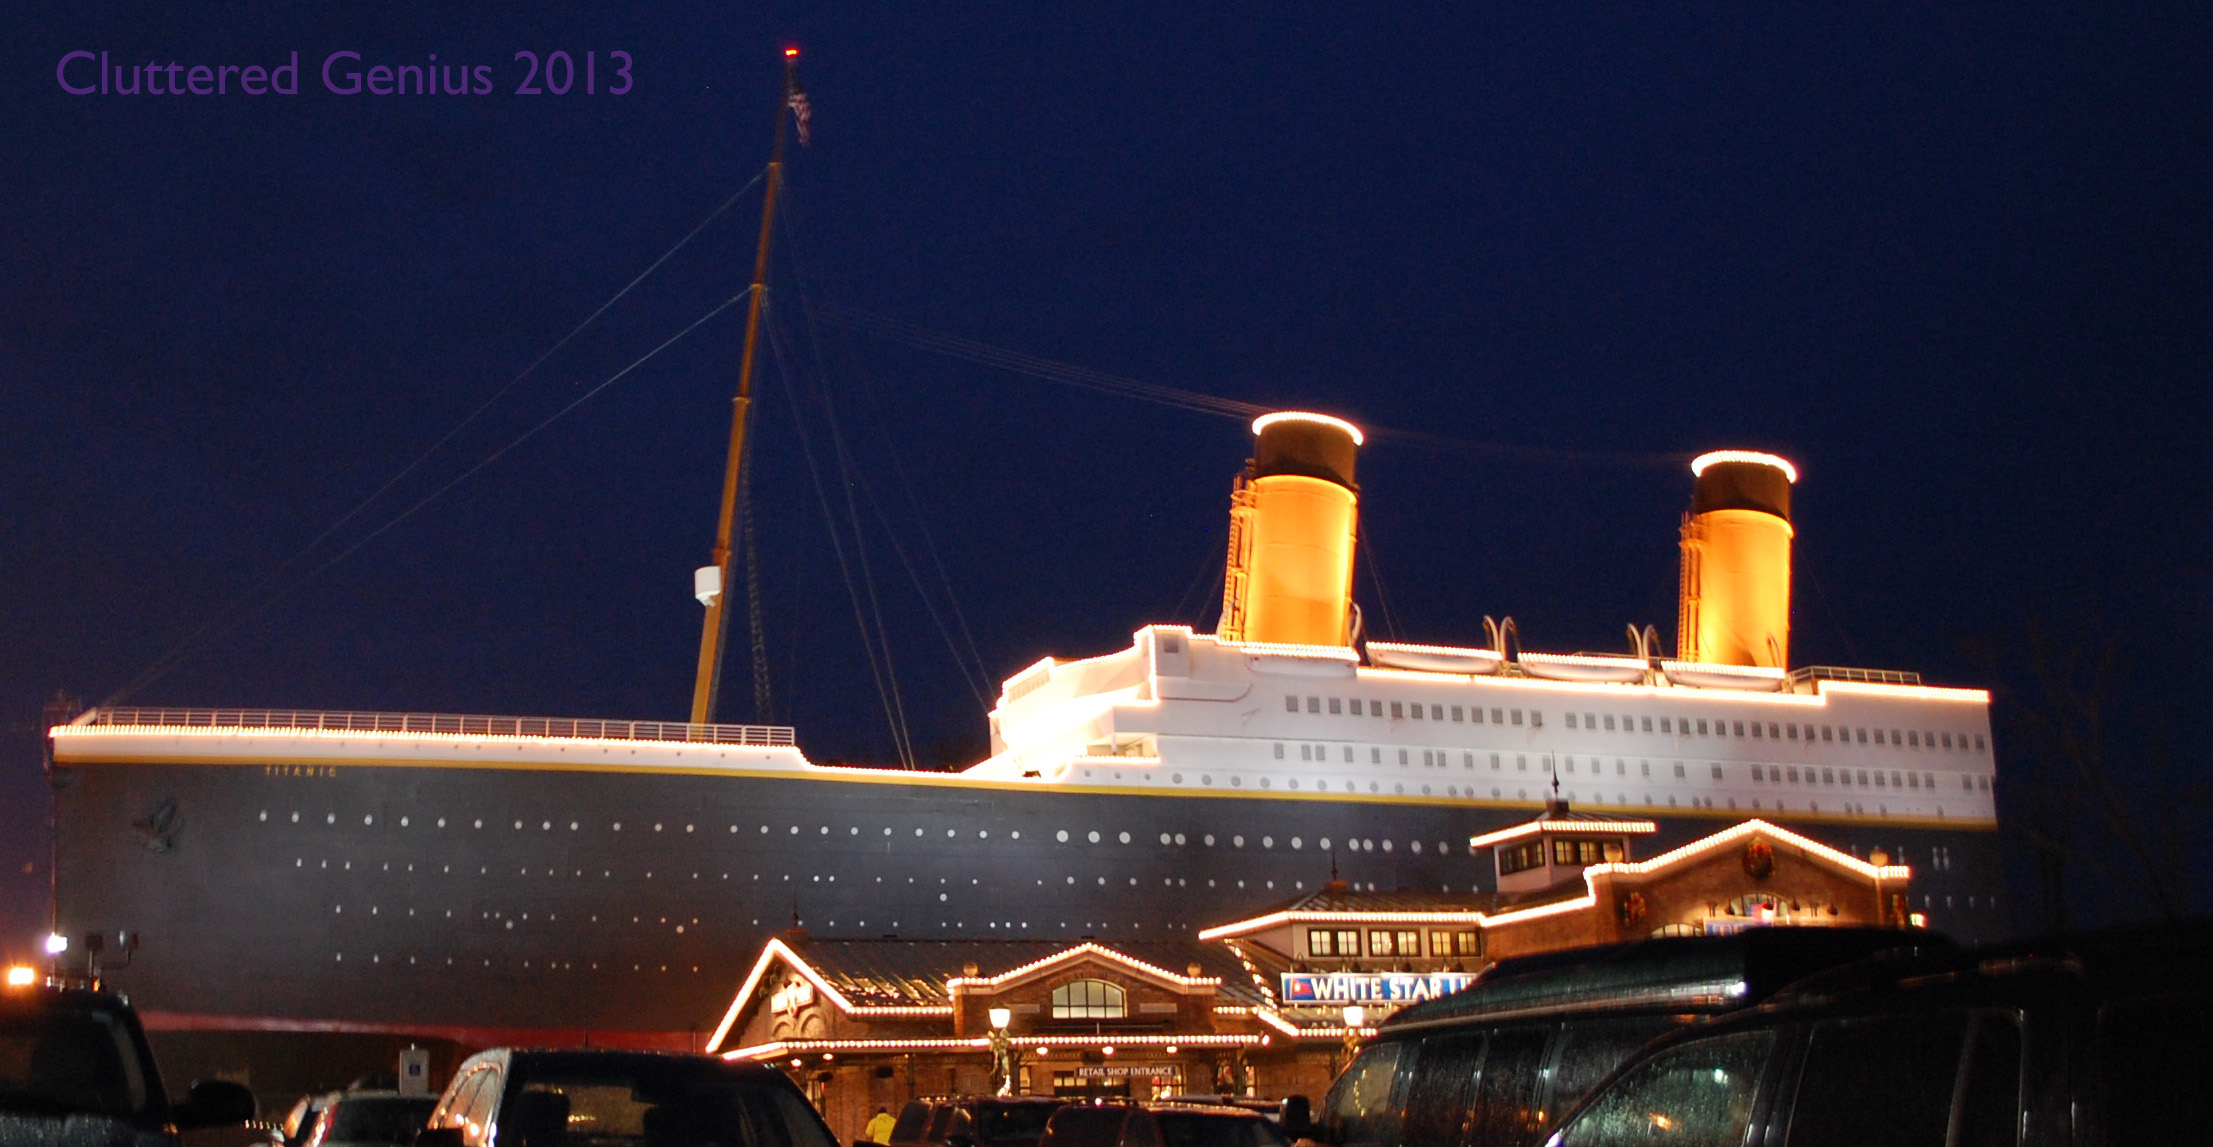 Titanic Museum in Pigeon Forge, TN